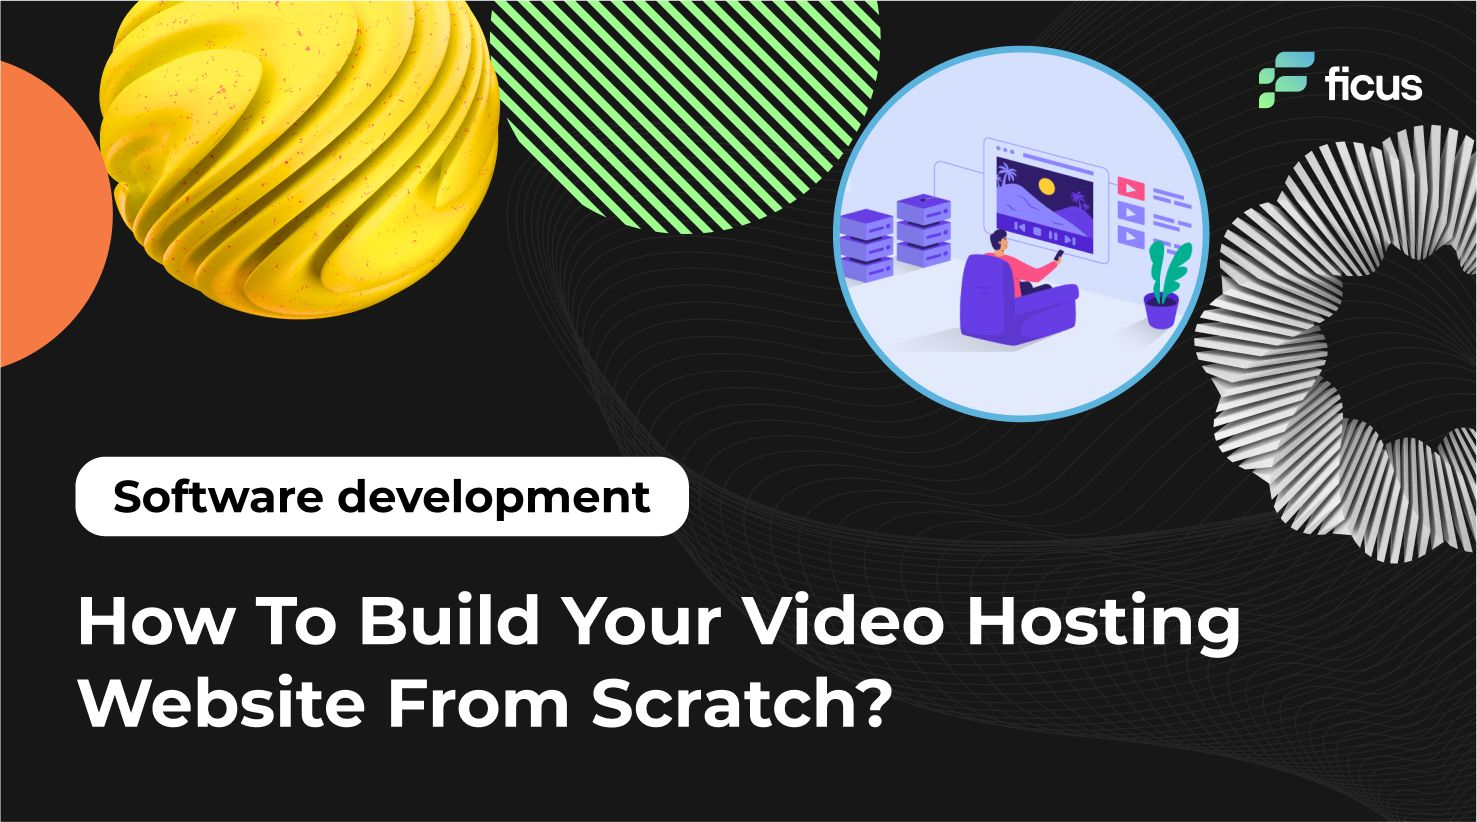 How To Build Your Video Hosting Website From Scratch?